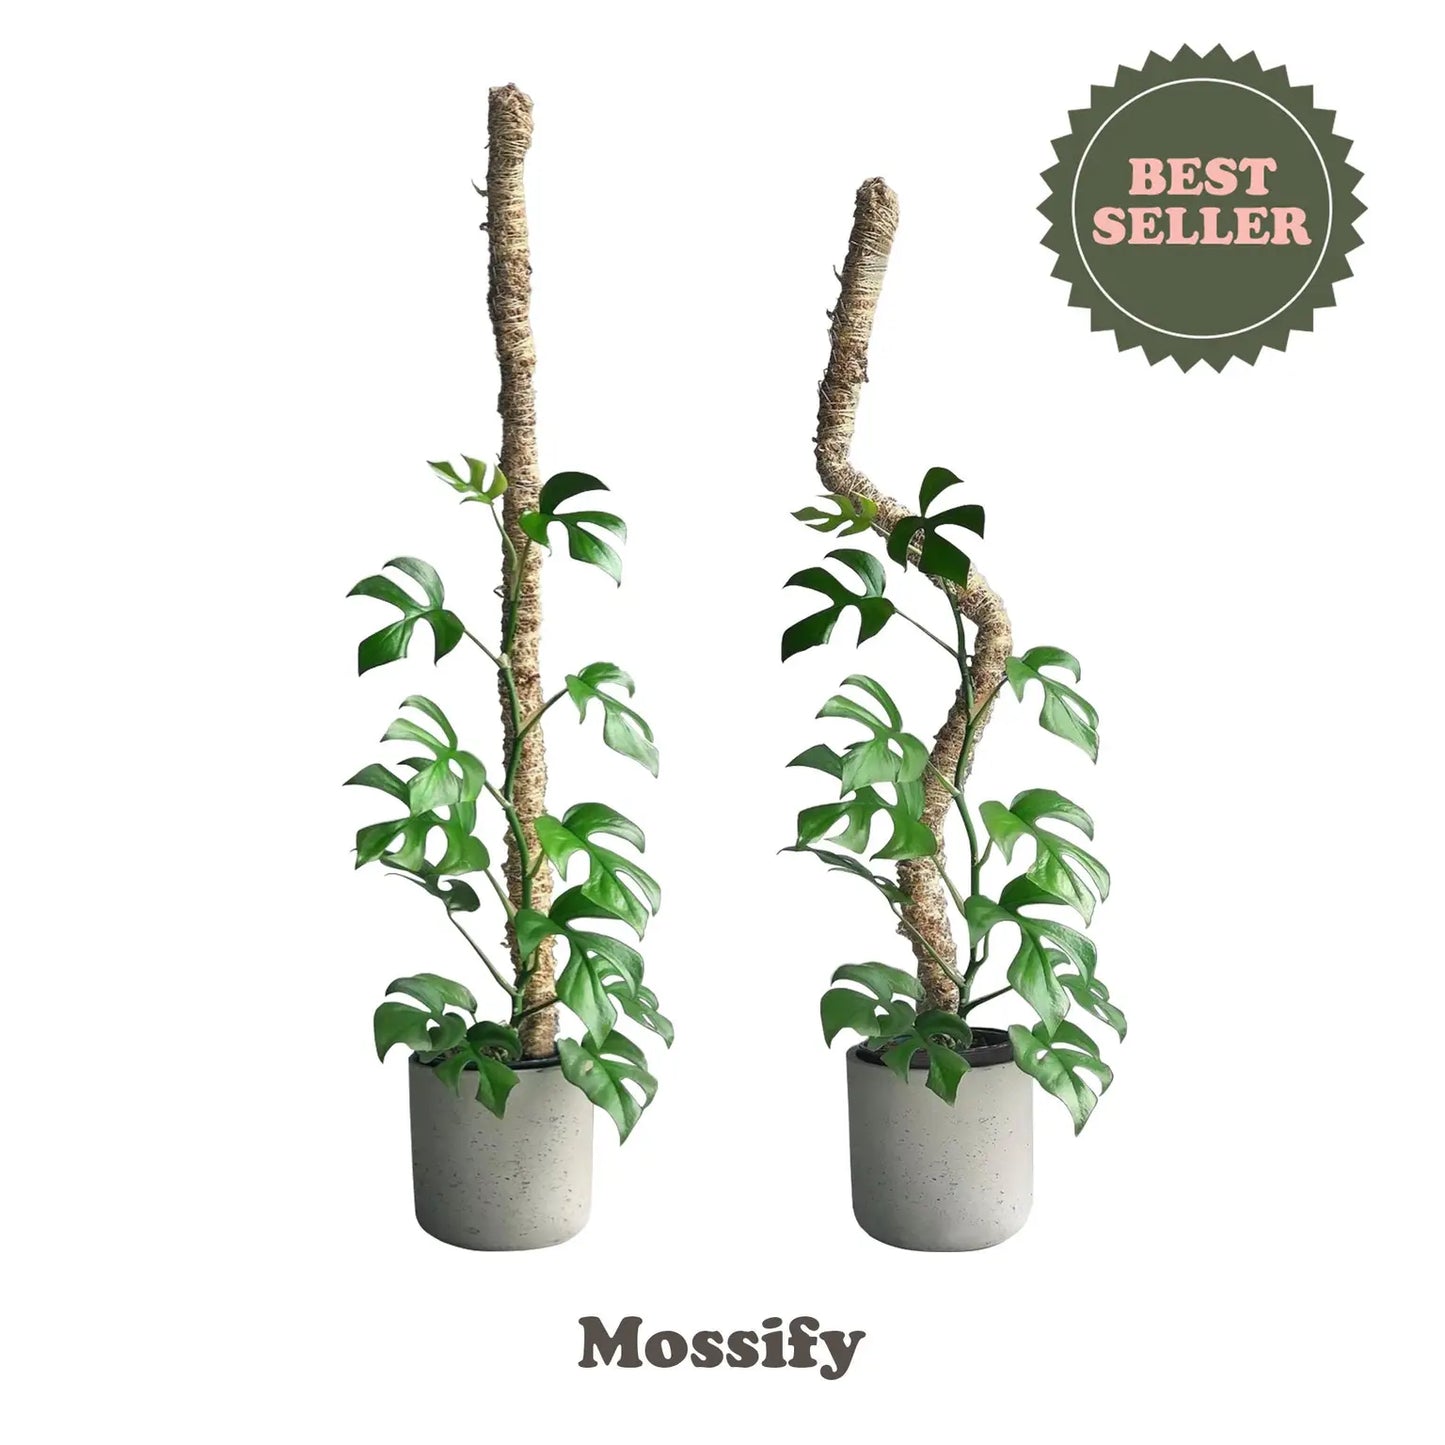 Mossify Bendable Mossy Pole